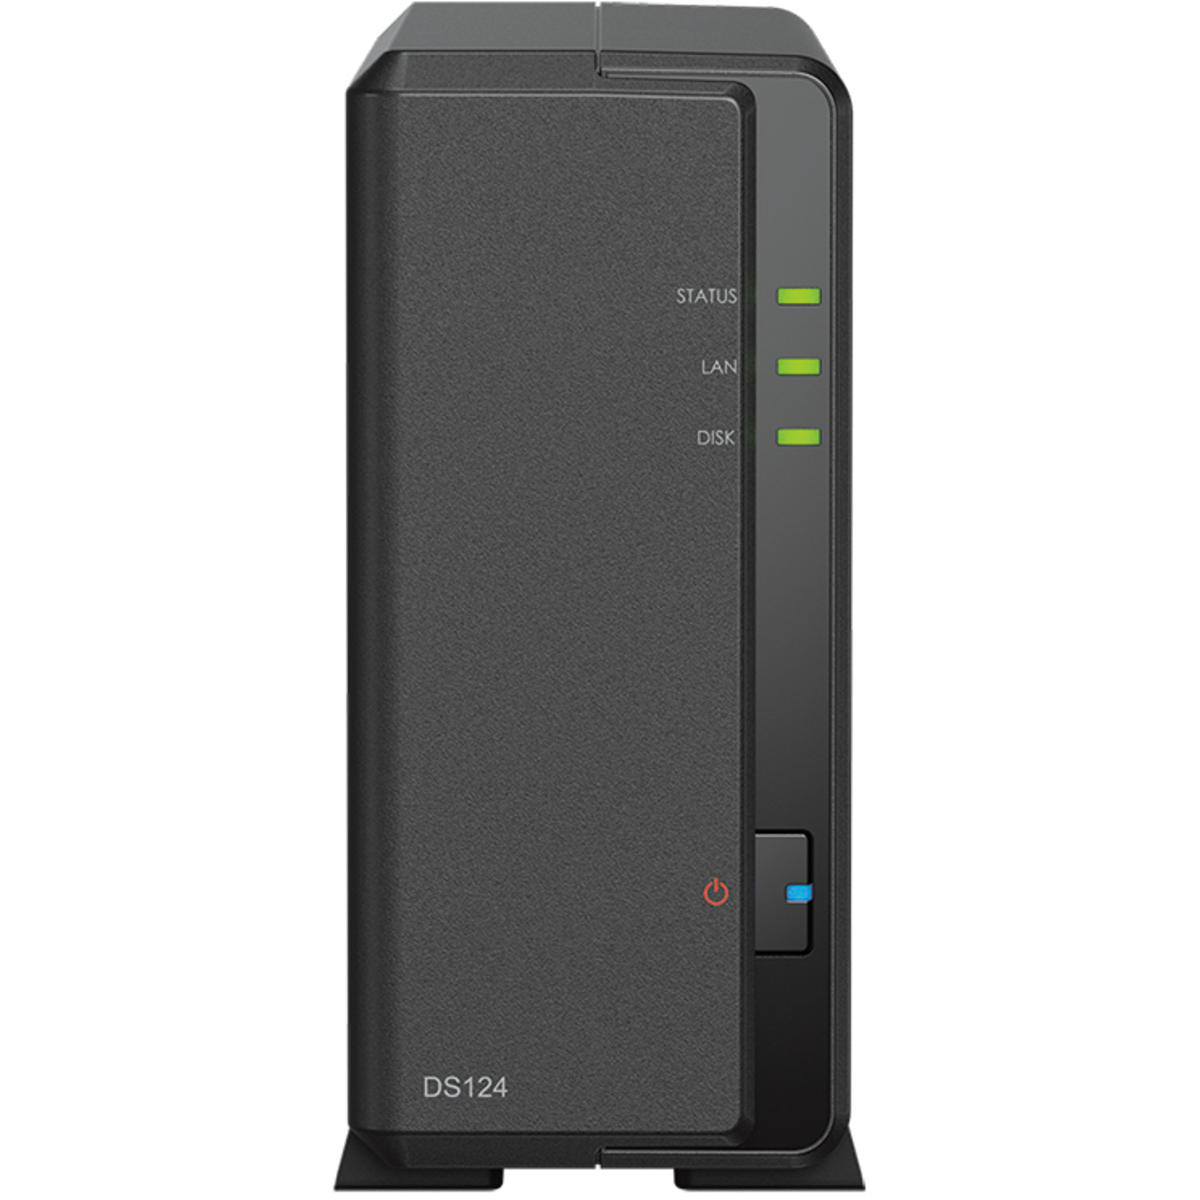 Synology DiskStation DS124 8tb 1-Bay Desktop Personal / Basic Home / Small Office NAS - Network Attached Storage Device 1x8tb Western Digital Ultrastar DC HC320 HUS728T8TALE6L4 3.5 7200rpm SATA 6Gb/s HDD ENTERPRISE Class Drives Installed - Burn-In Tested DiskStation DS124